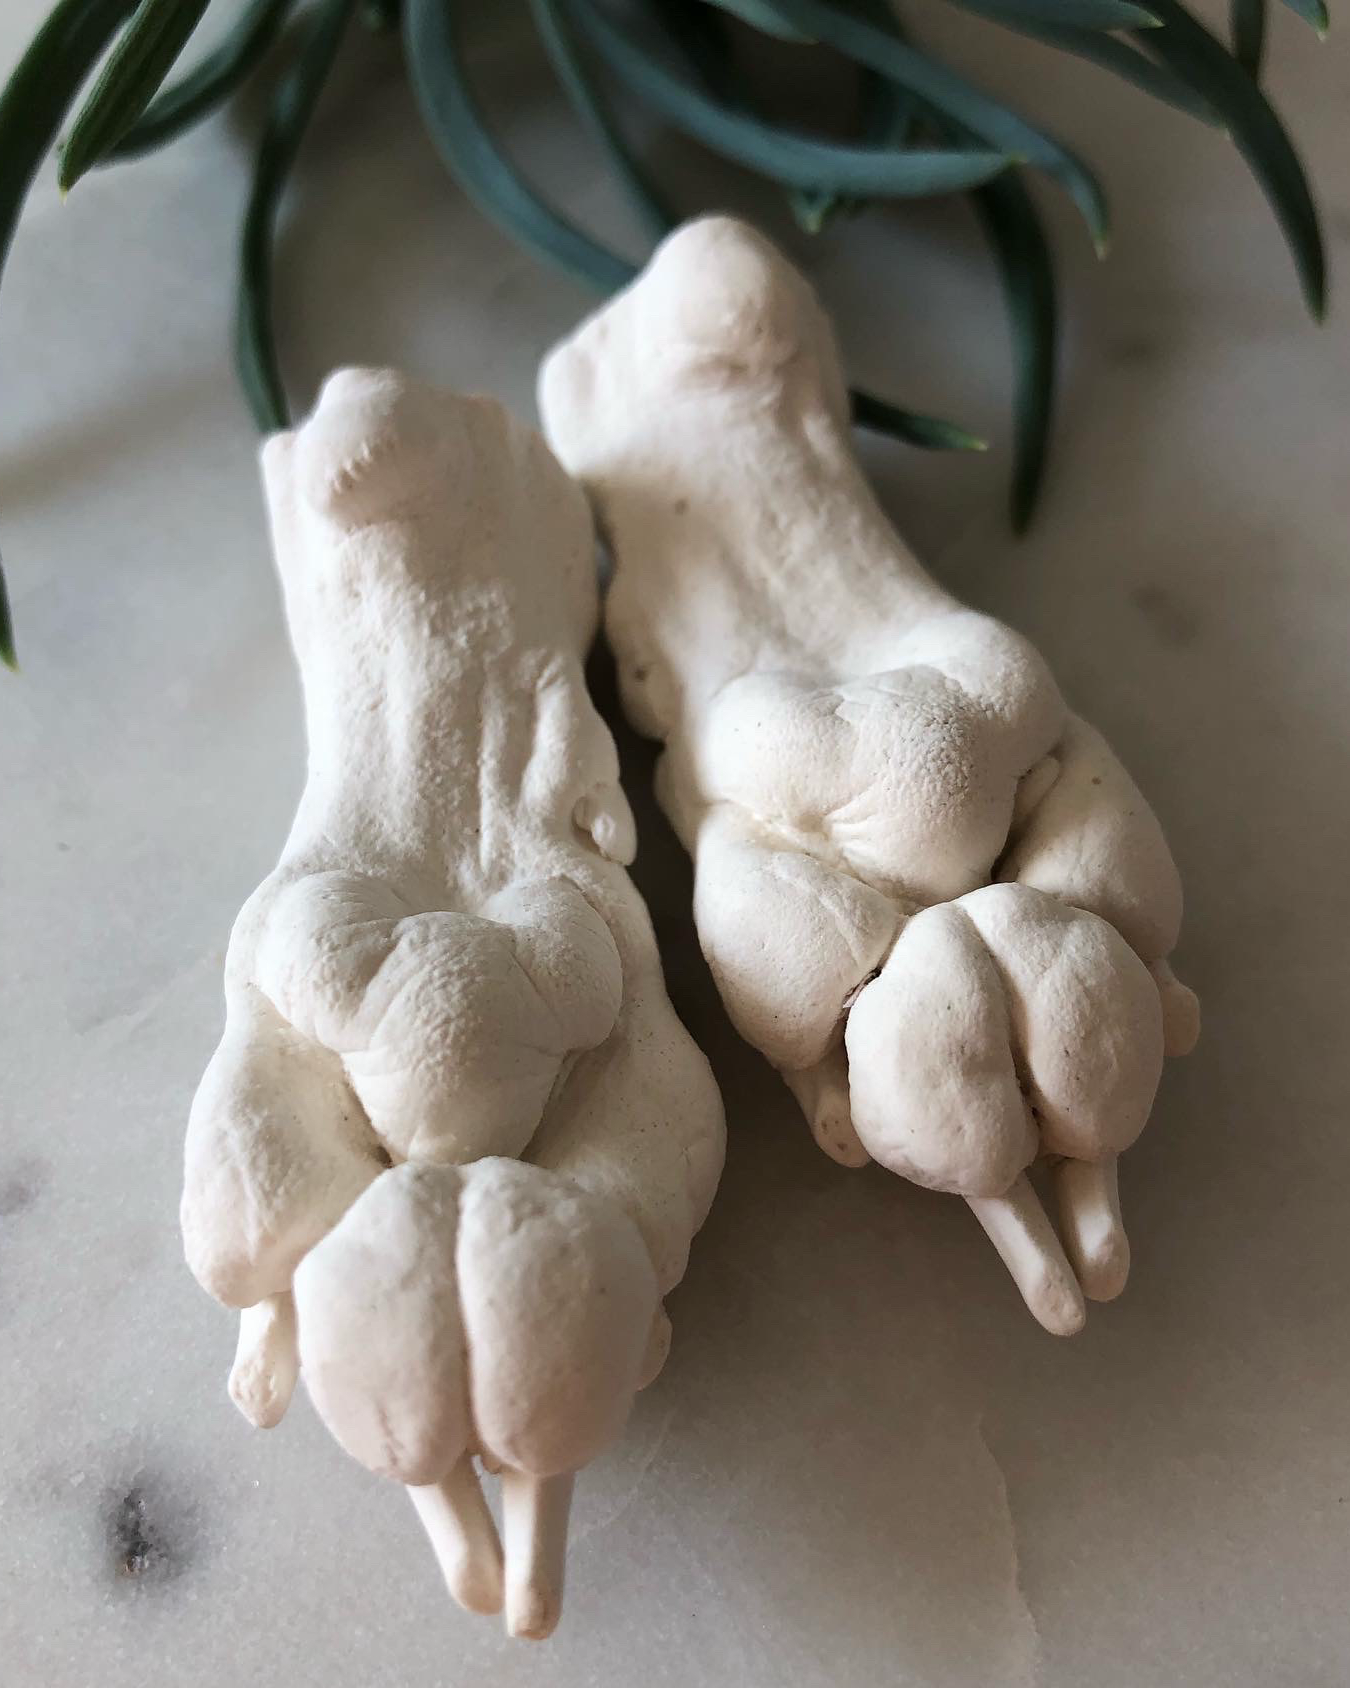 Two cast dog paws flipped over with a plant